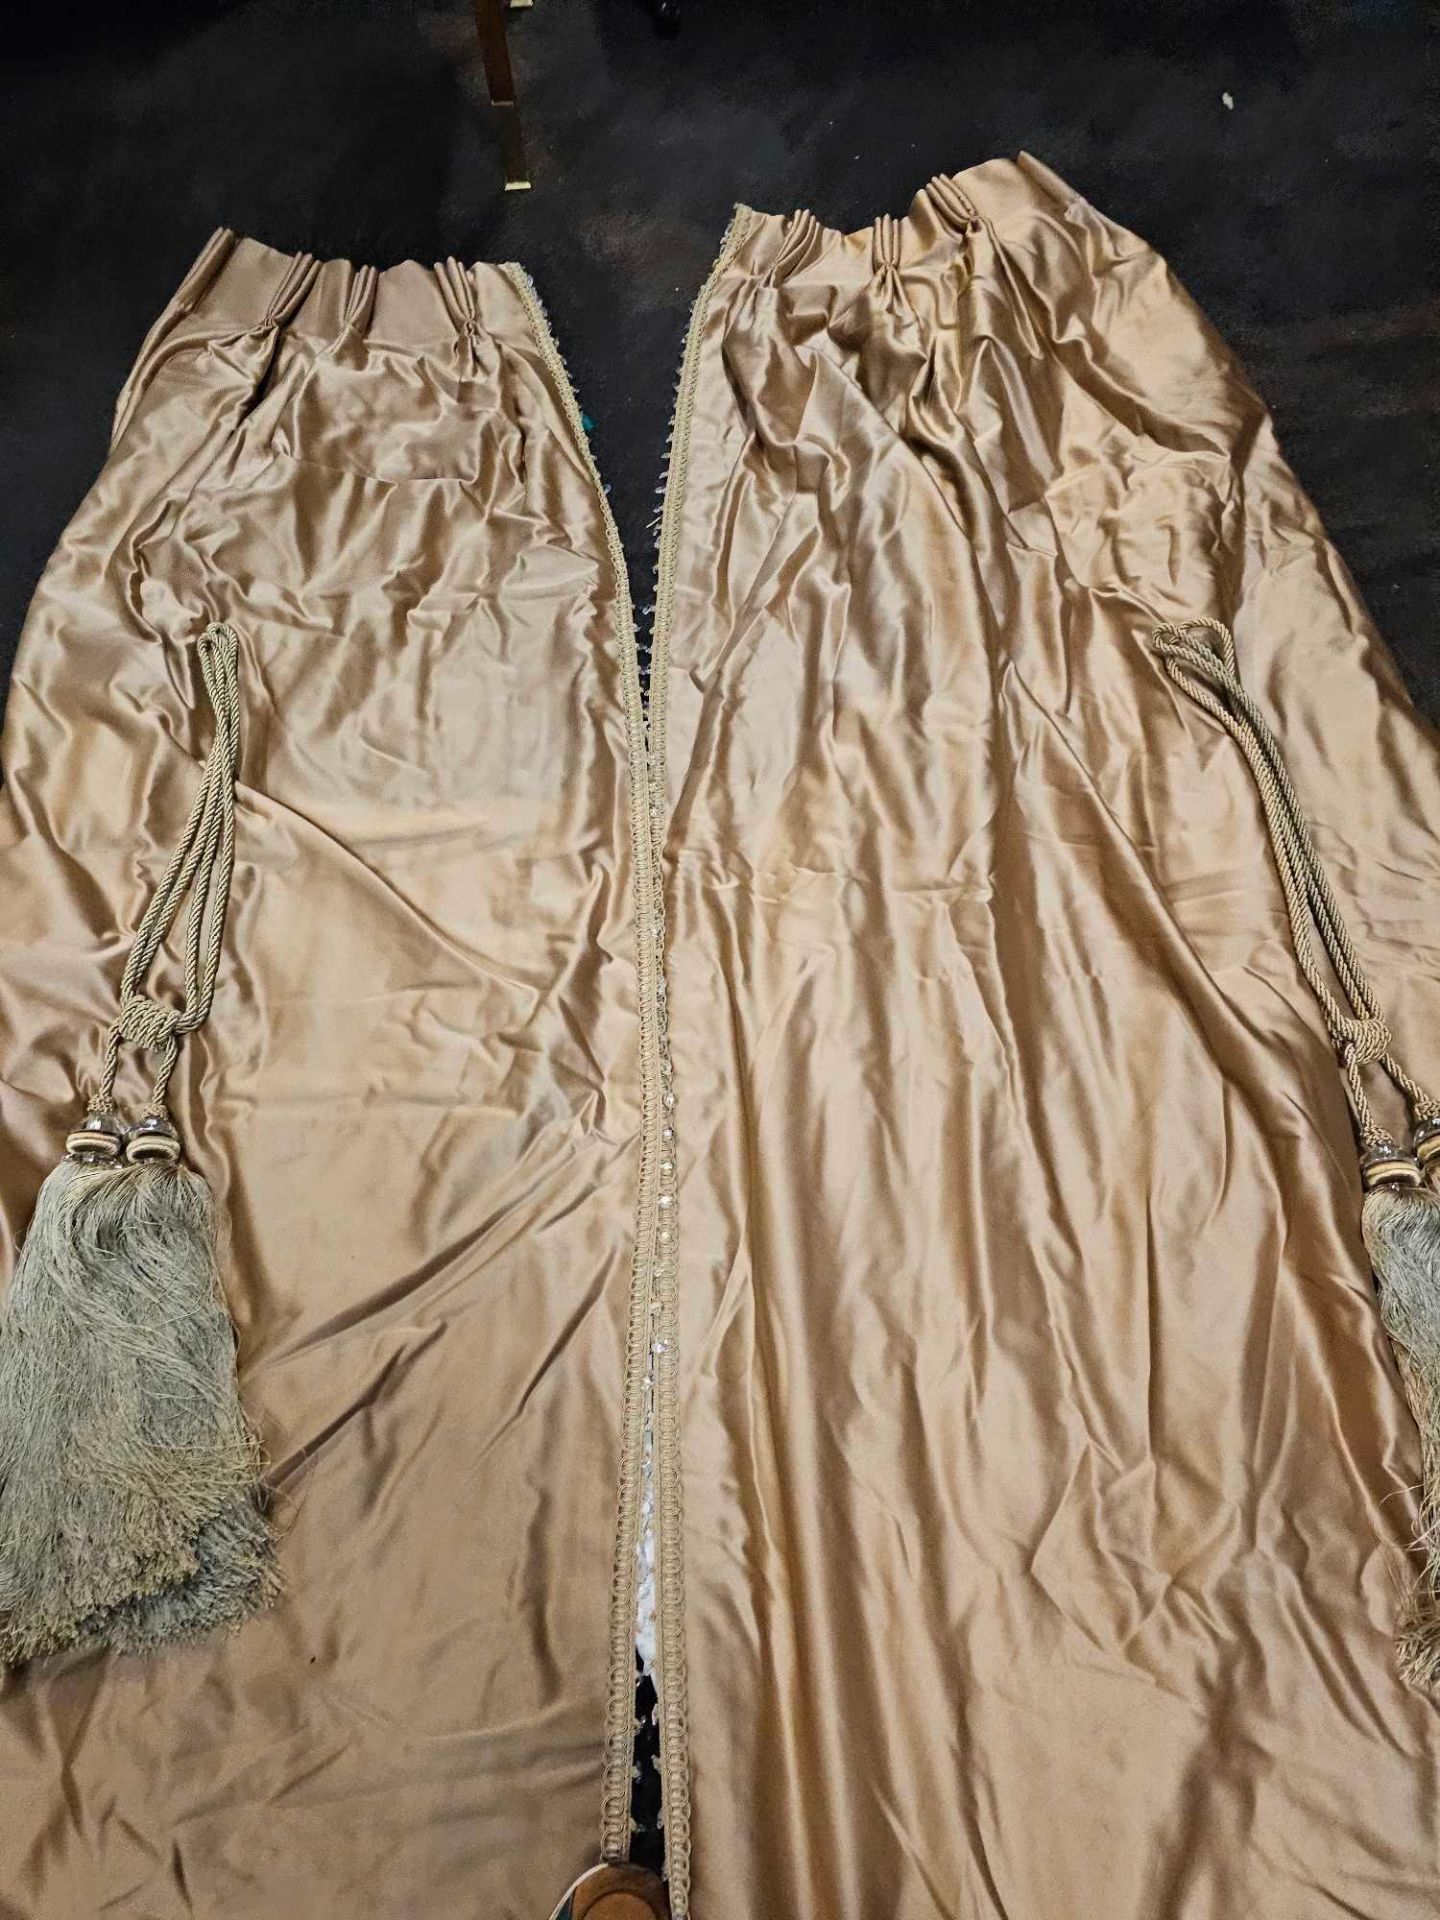 A Pair of Dark Gold Silk Drapes With Crystal Trim Edge With Silver Gold And Cream Jabots With Edge - Image 6 of 6